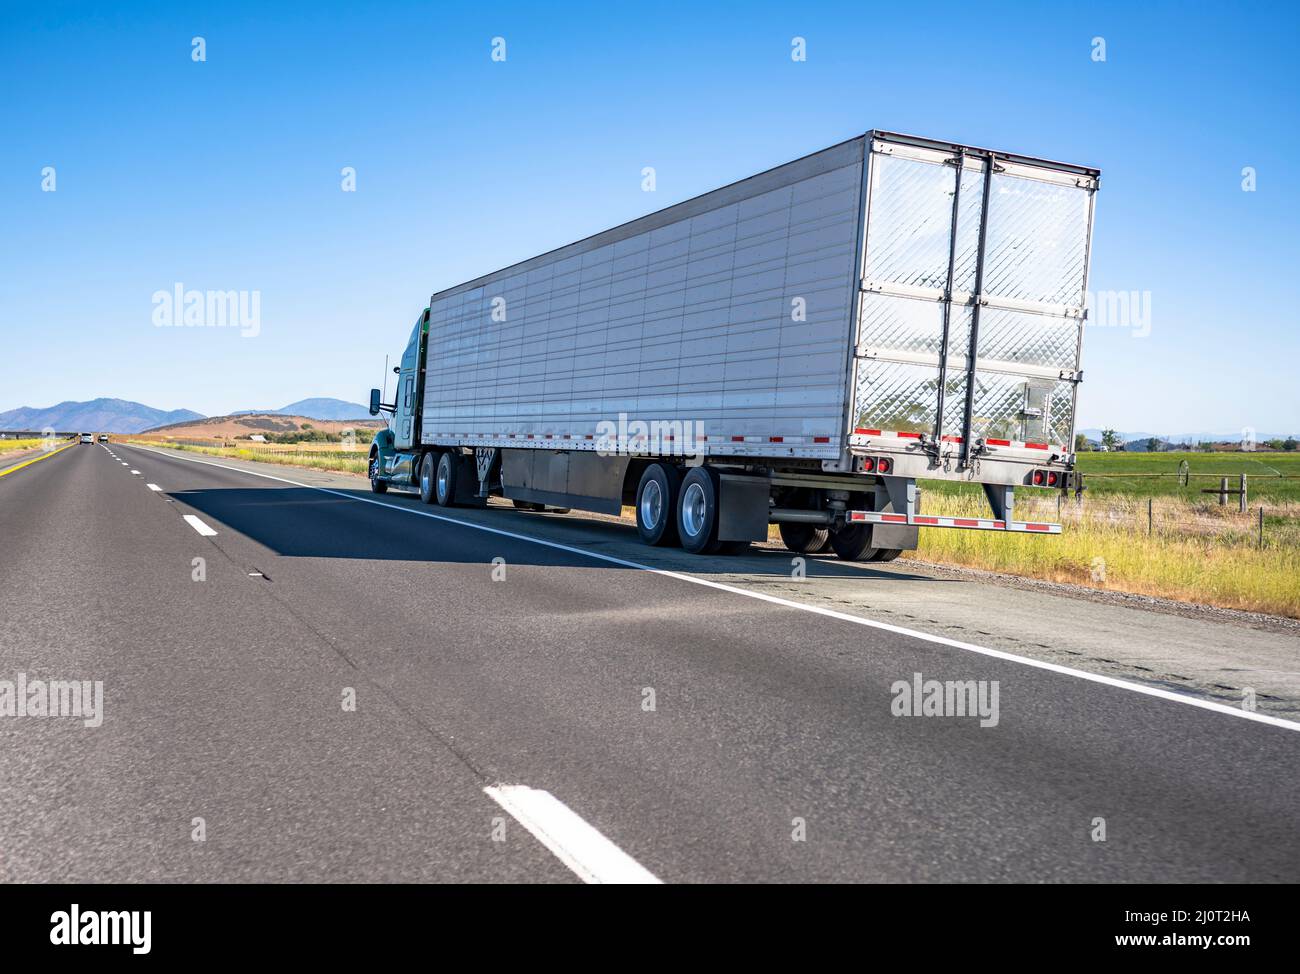 Broken green big rig semi truck with extended cab for long haul and refrigerator semi trailer standing out of service on the road shoulder in Washingt Stock Photo